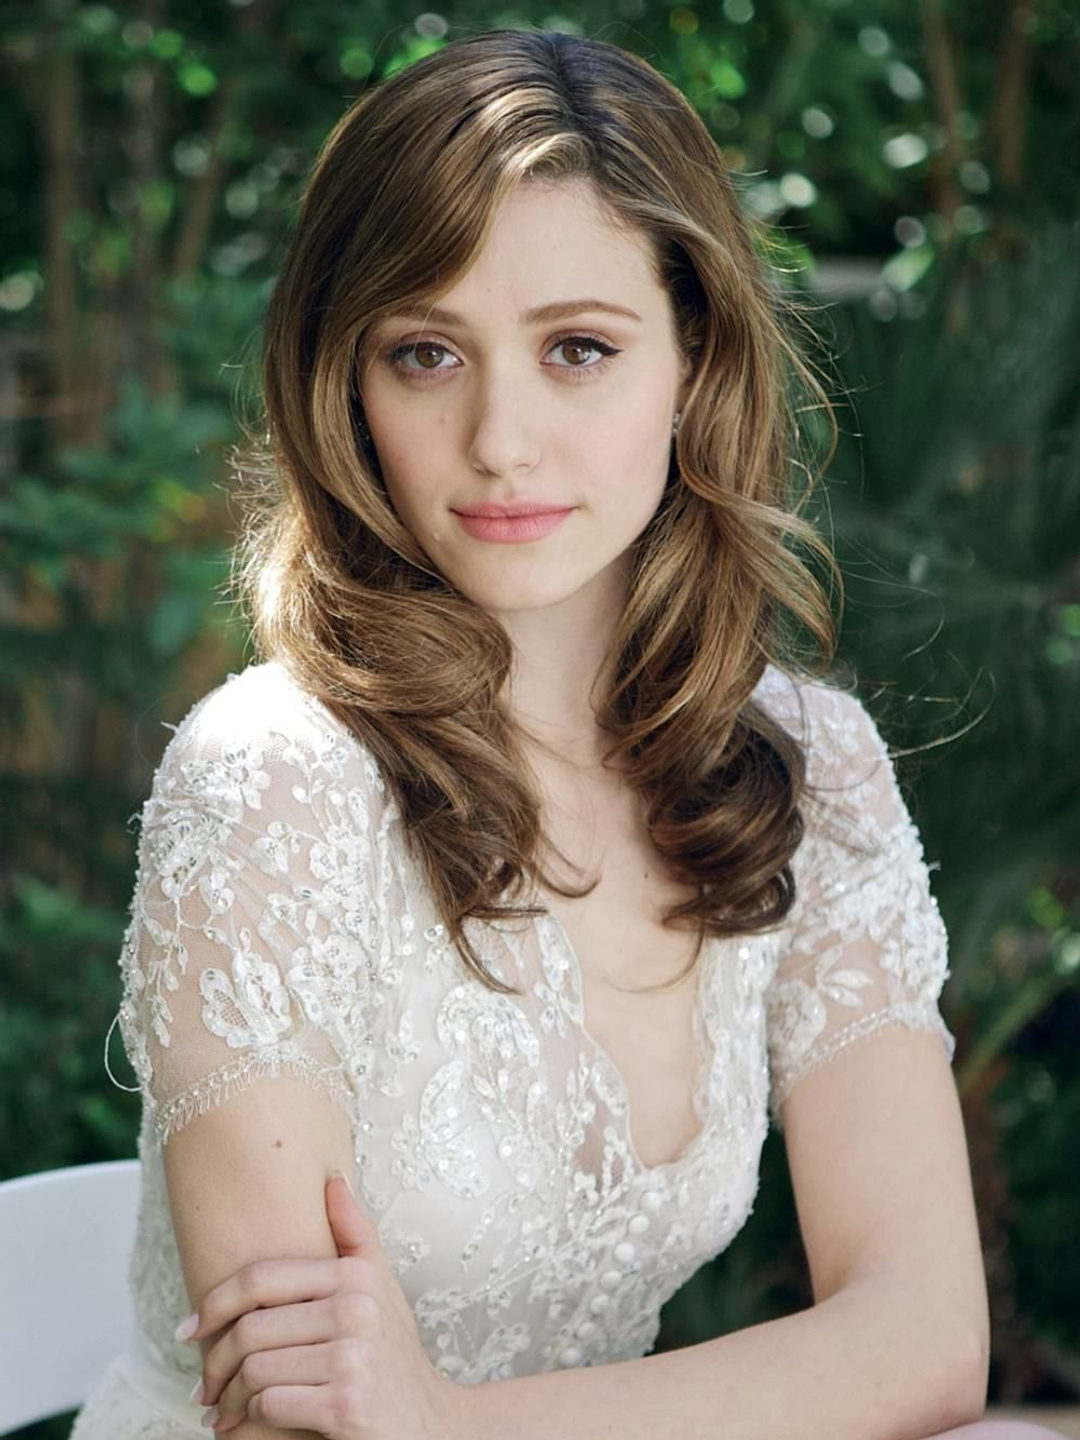 Emmy Rossum how old is she